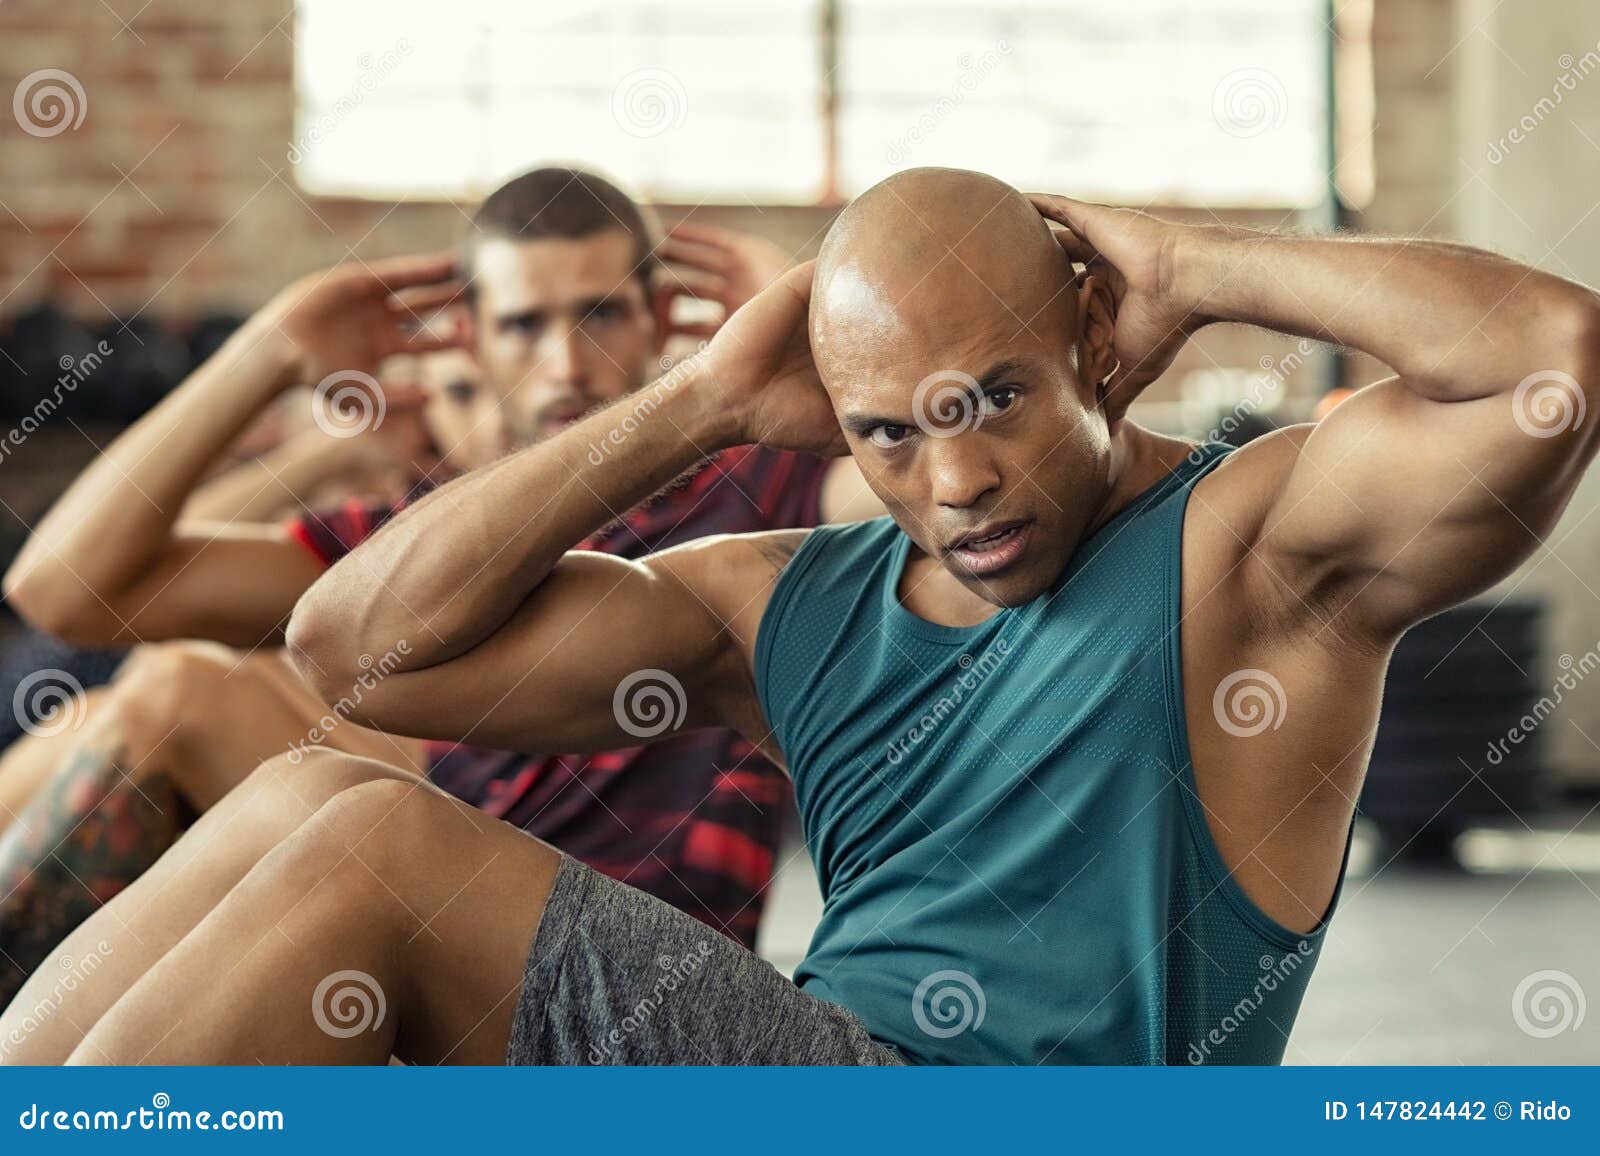 Black man, fitness and body, measuring tape and abs with health